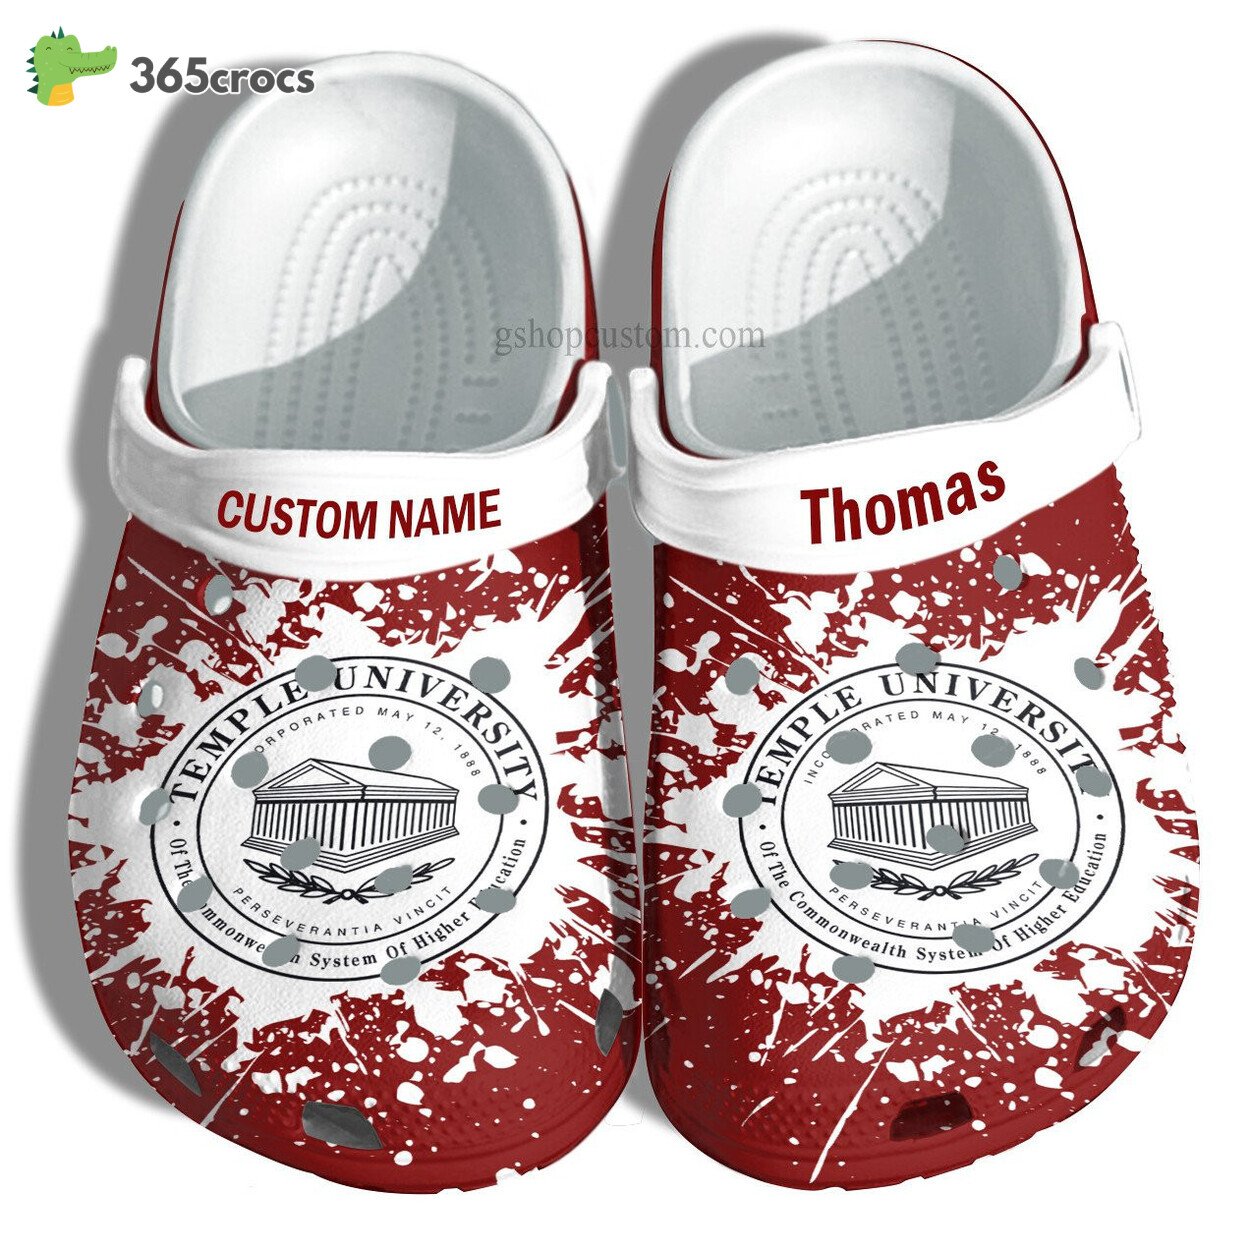 Temple University Graduation Gifts Croc Shoes Customize Admission Gift Shoes